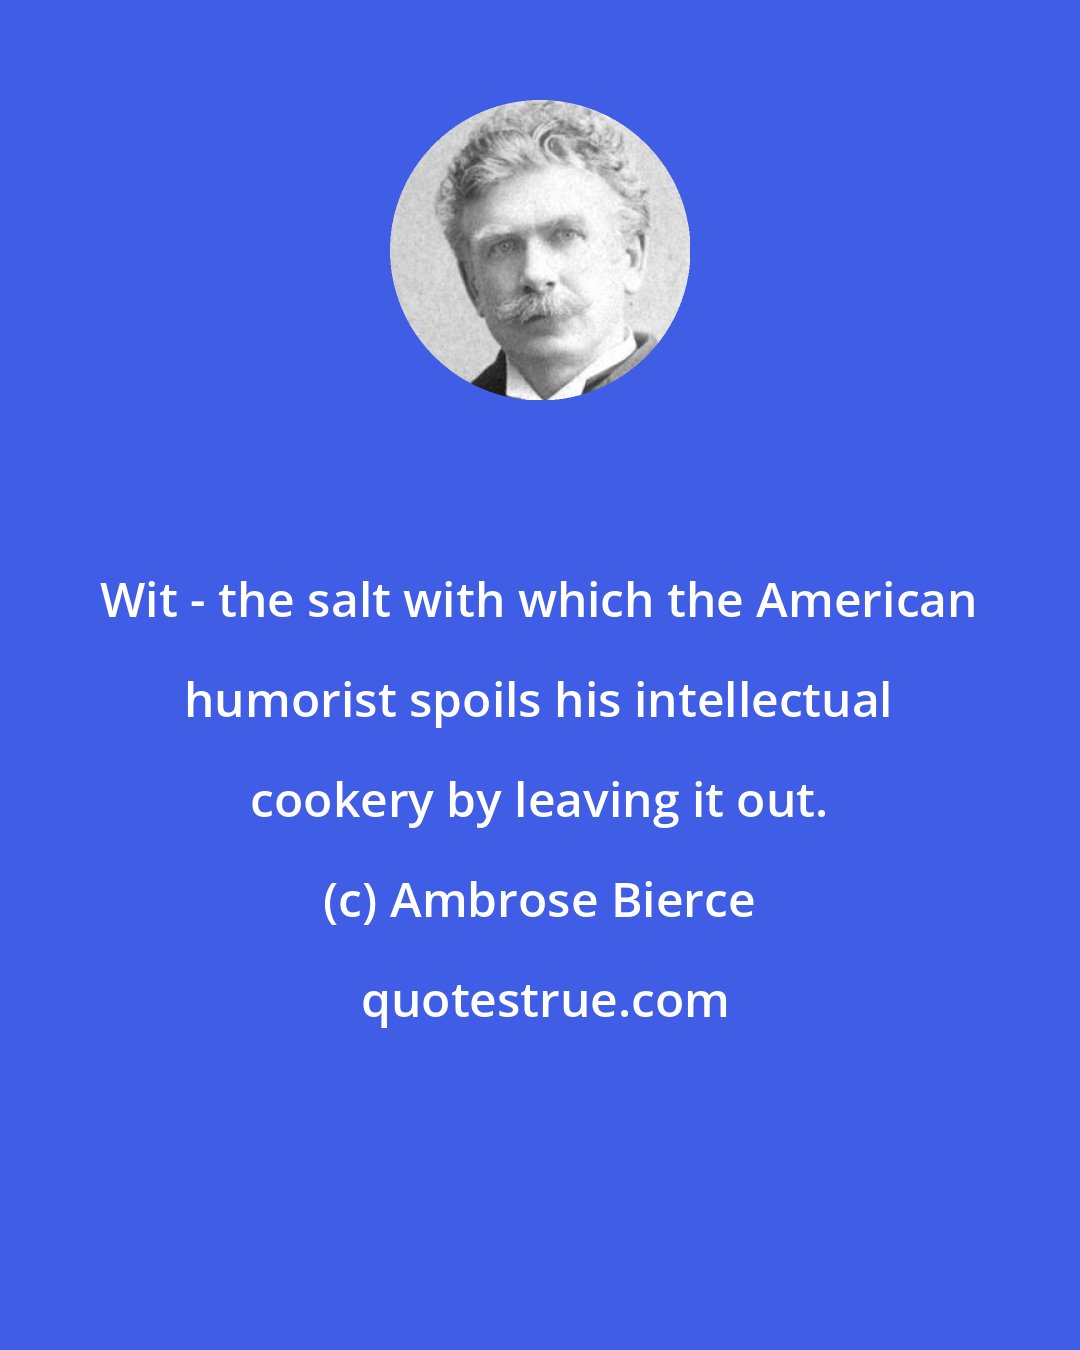 Ambrose Bierce: Wit - the salt with which the American humorist spoils his intellectual cookery by leaving it out.